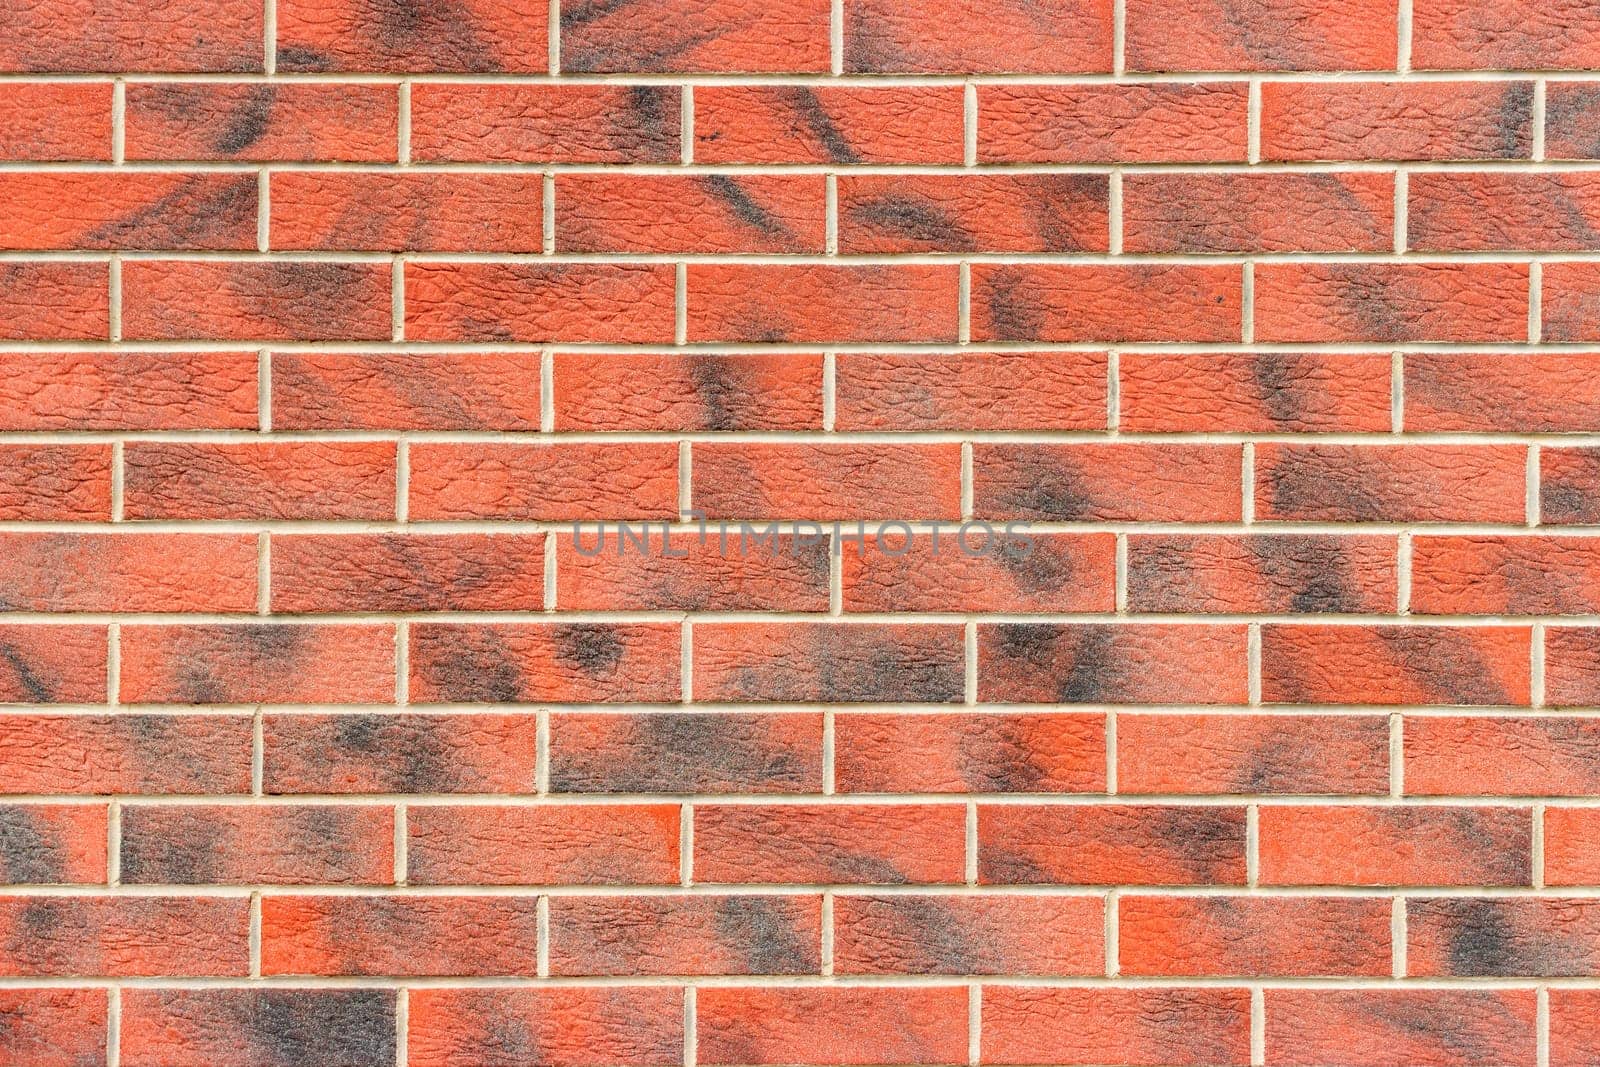 brick wall texture background material of industry construction, image used retro filter